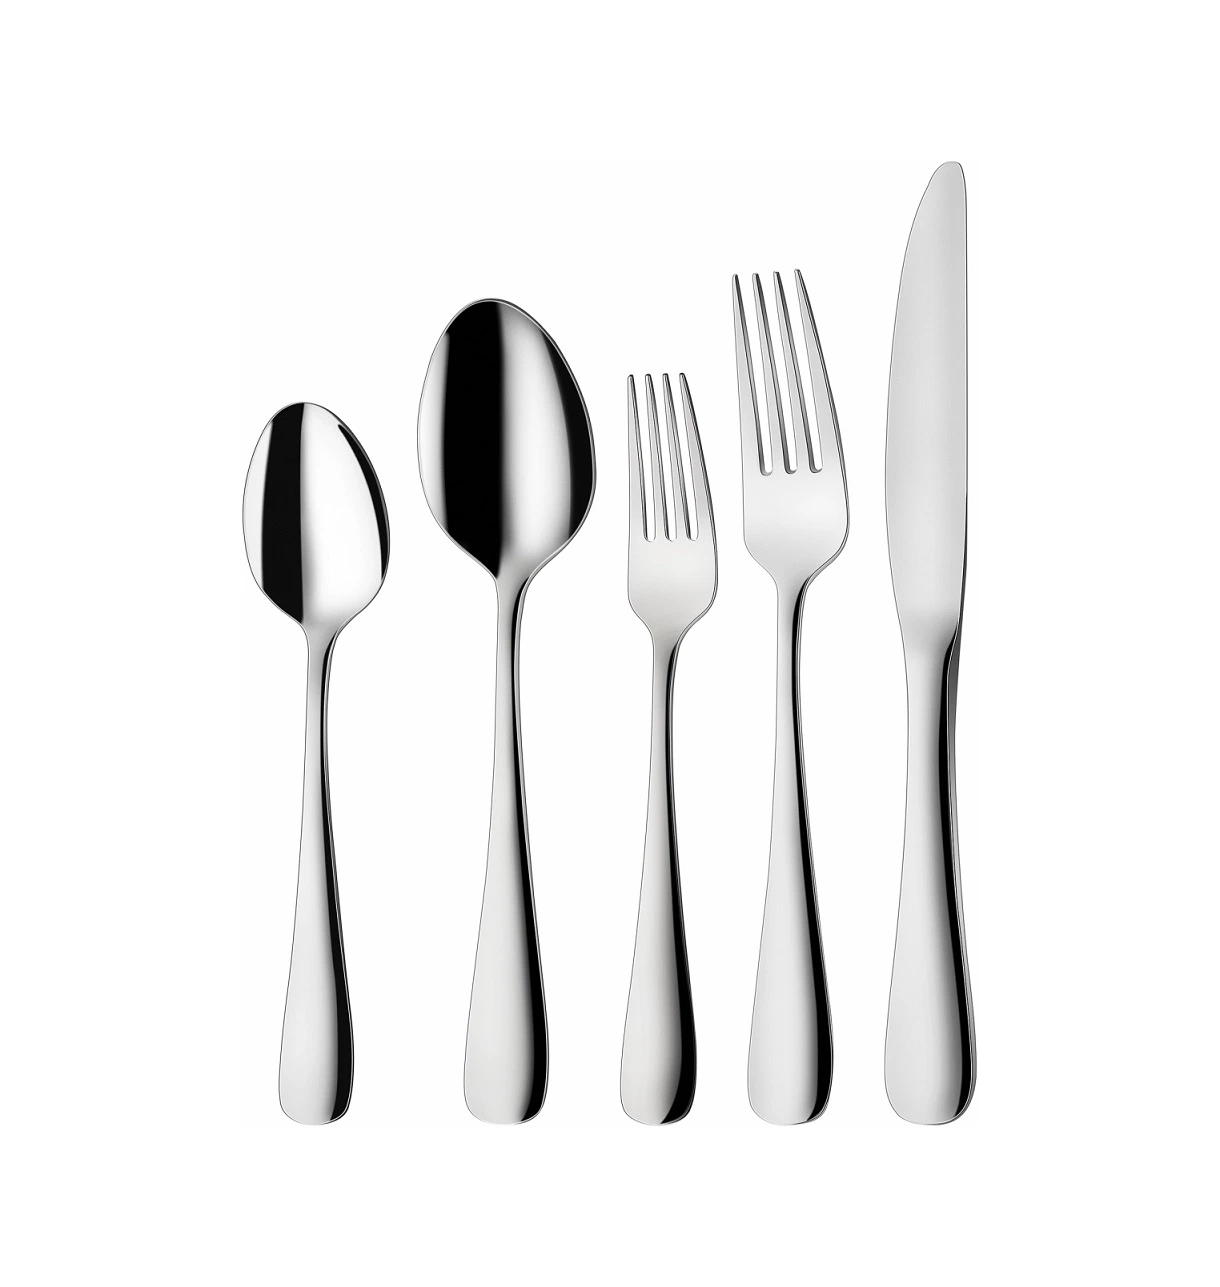 Stainless Steel Hotel Cutlery Including Knife Fork and Spoon